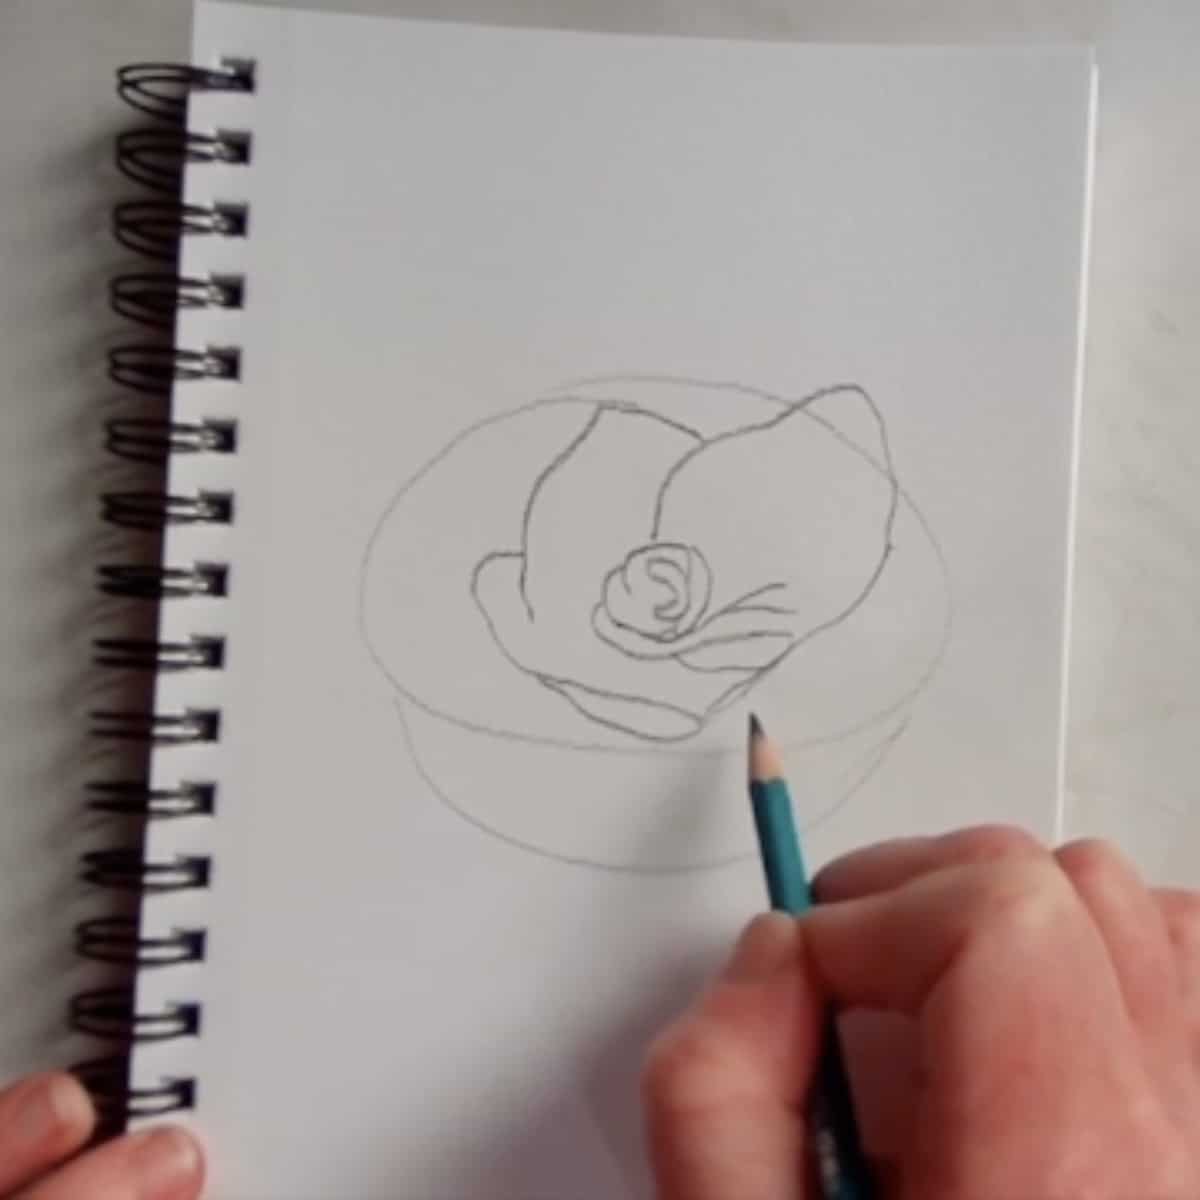 How to Draw a Rose in Pencil - YouTube